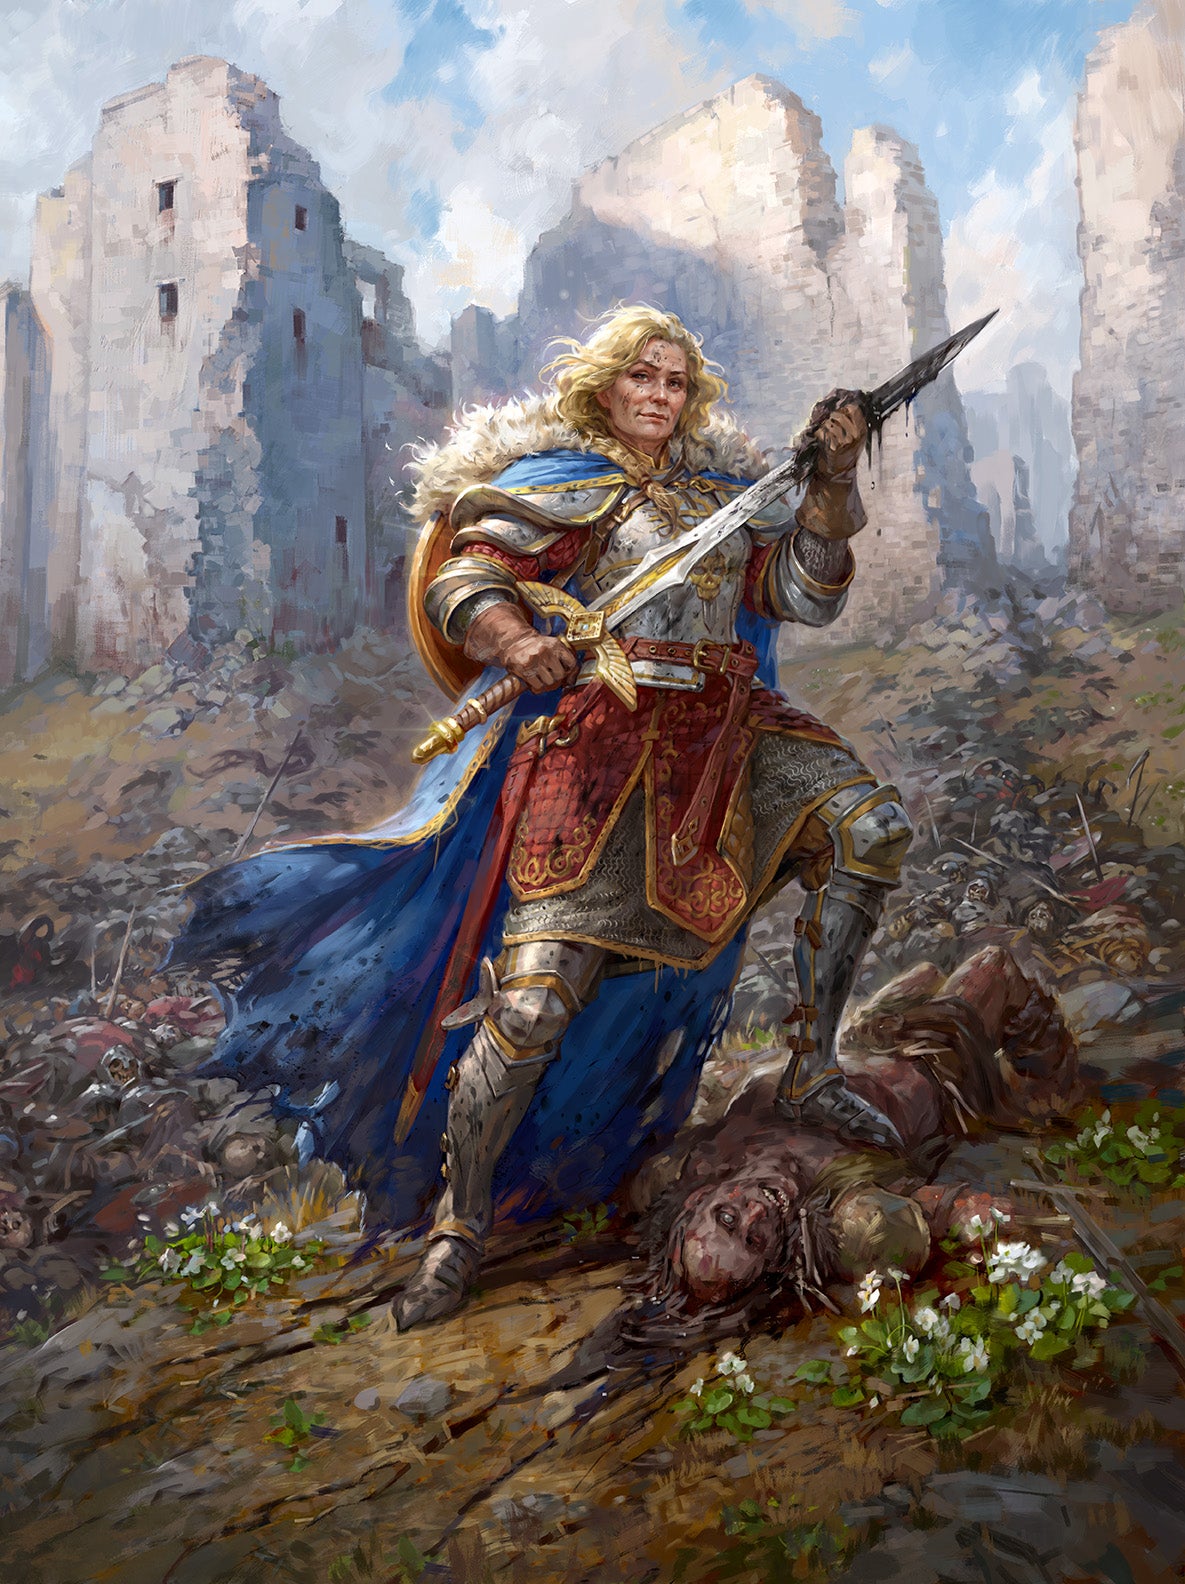 A blonde, armored, knight standing above a slain foe, cleaning their sword